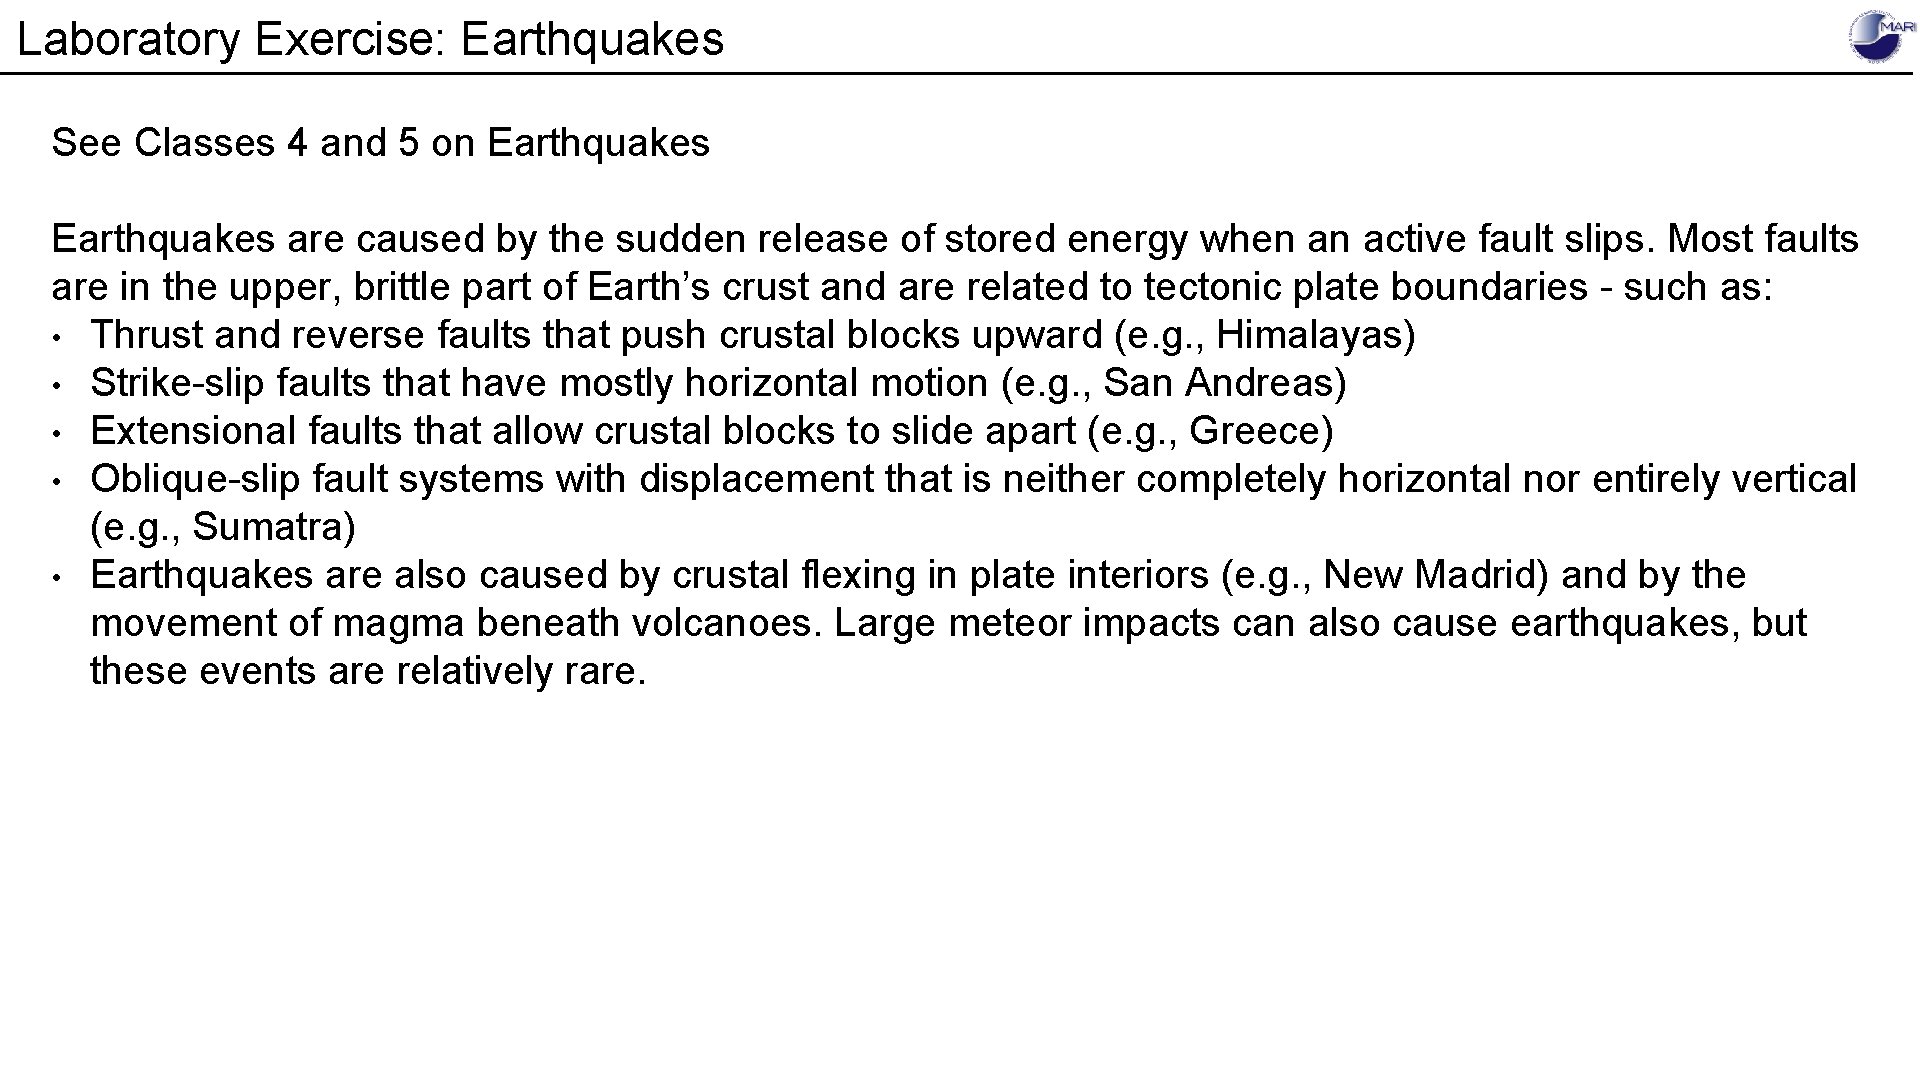 Laboratory Exercise: Earthquakes See Classes 4 and 5 on Earthquakes are caused by the